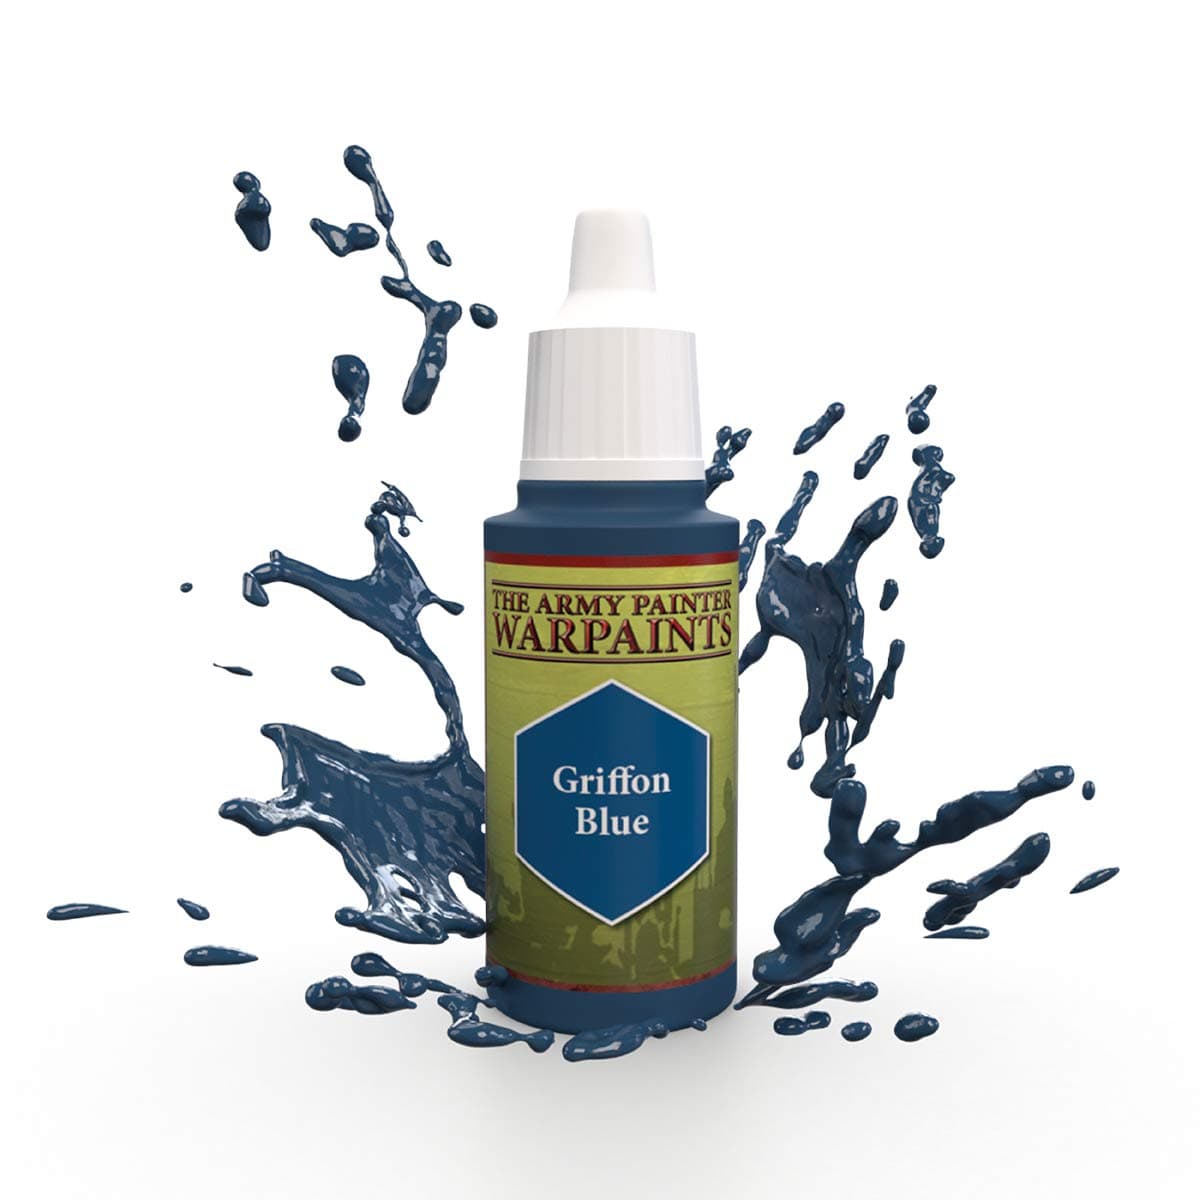 The Army Painter Accessories The Army Painter Warpaints: Griffon Blue 18ml